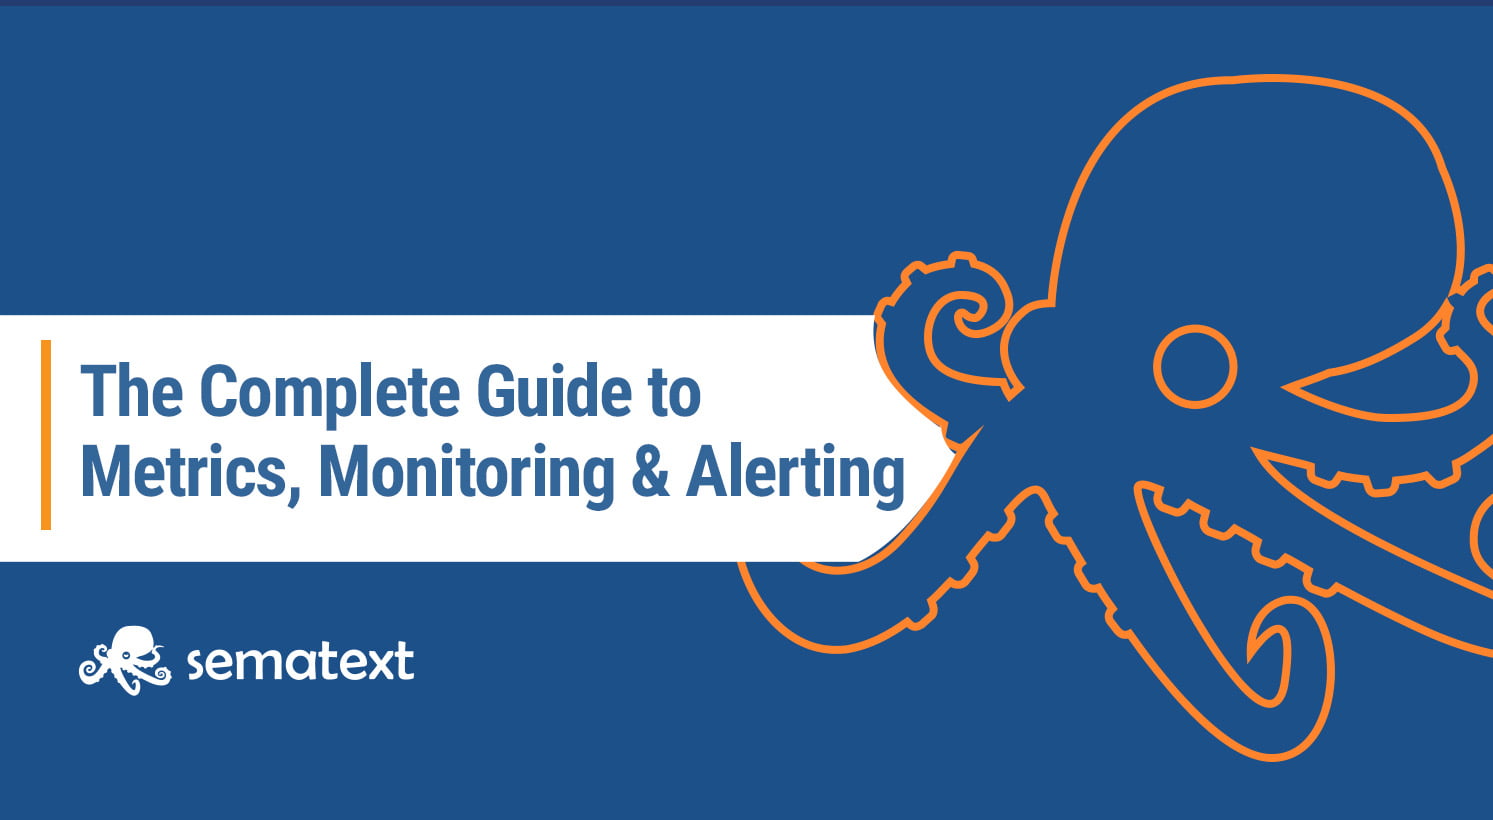 The Complete Guide to Metrics, Monitoring and Alerting